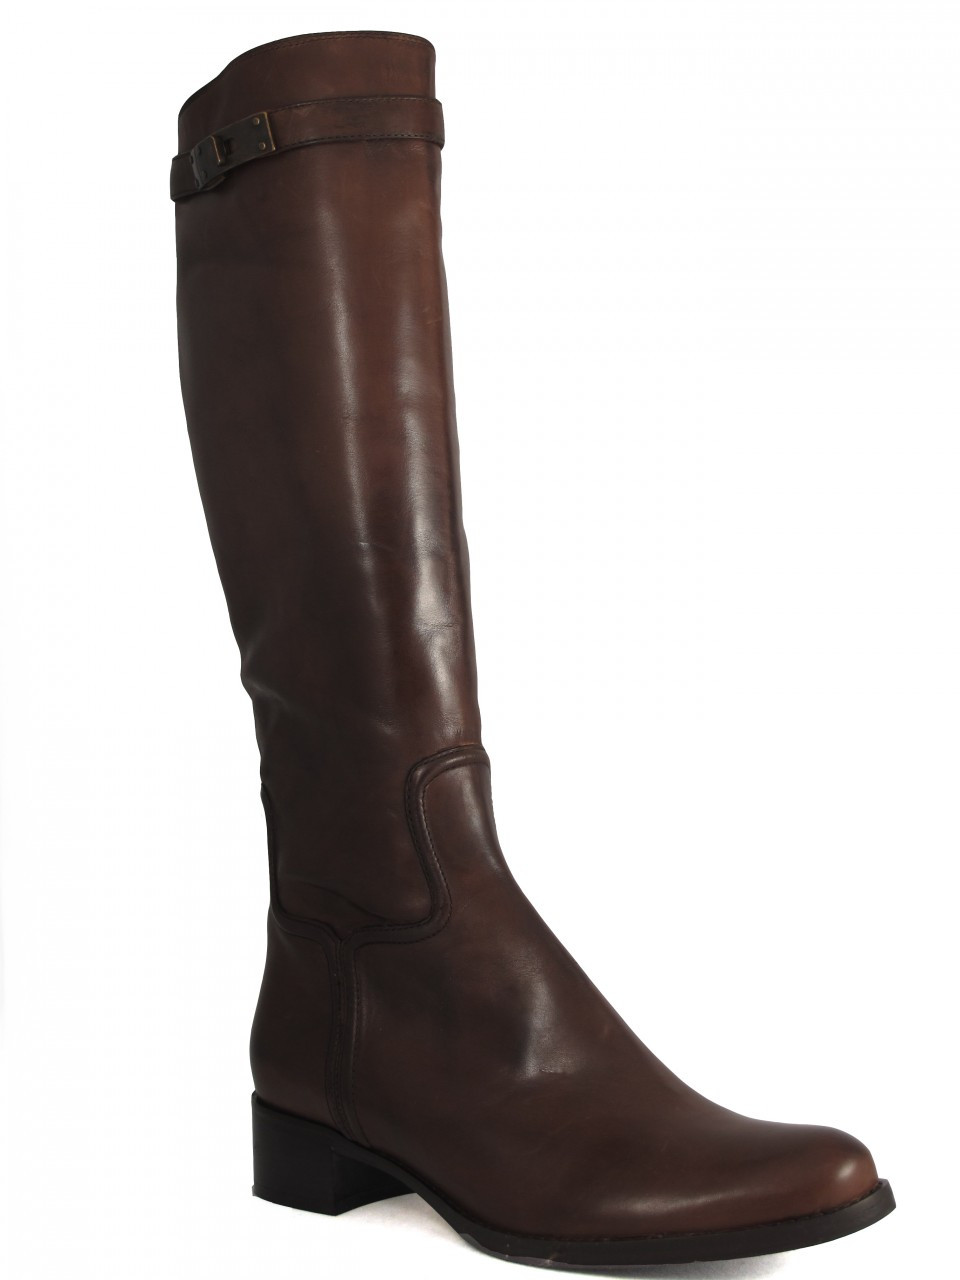 womens italian leather boots